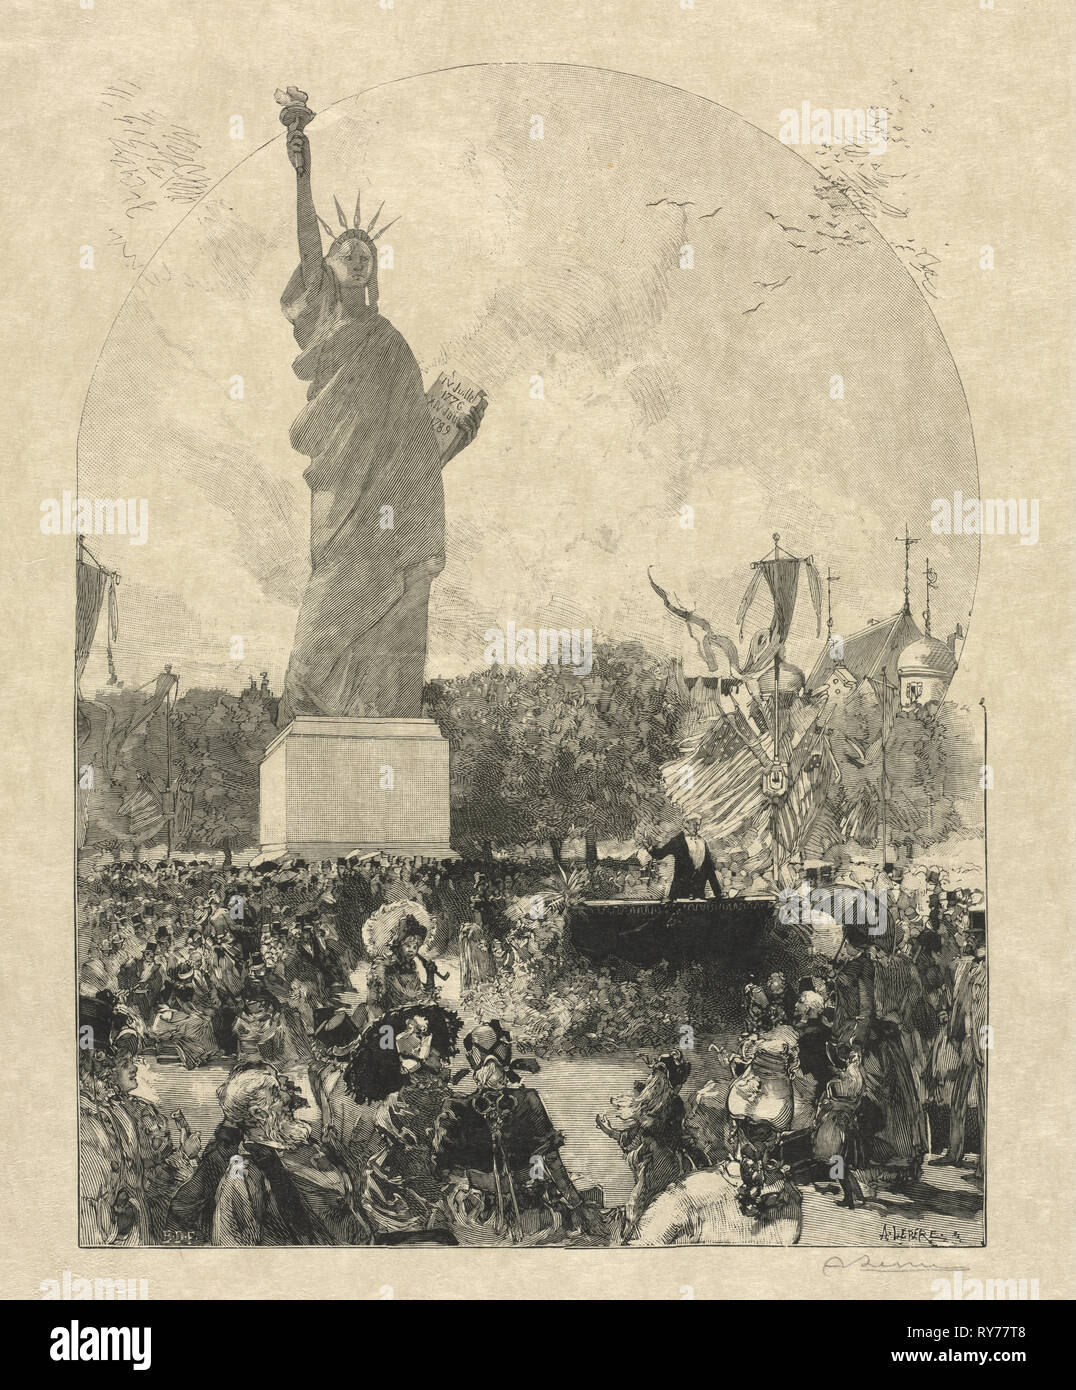 Liberty Enlightening the World, Offered to the City of Paris by the Americans, 1885. After Auguste Louis Lepère (French, 1849-1918), Publiished in Le Monde Illustre, May 30, 1885, Tony Beltrand (French, 1847-1902), and Eugène Dété (French), Frédéric Florian (Swiss, 1858-1926). Wood engraving; sheet: 45 x 32.4 cm (17 11/16 x 12 3/4 in.); image: 26.2 x 20.2 cm (10 5/16 x 7 15/16 in Stock Photo